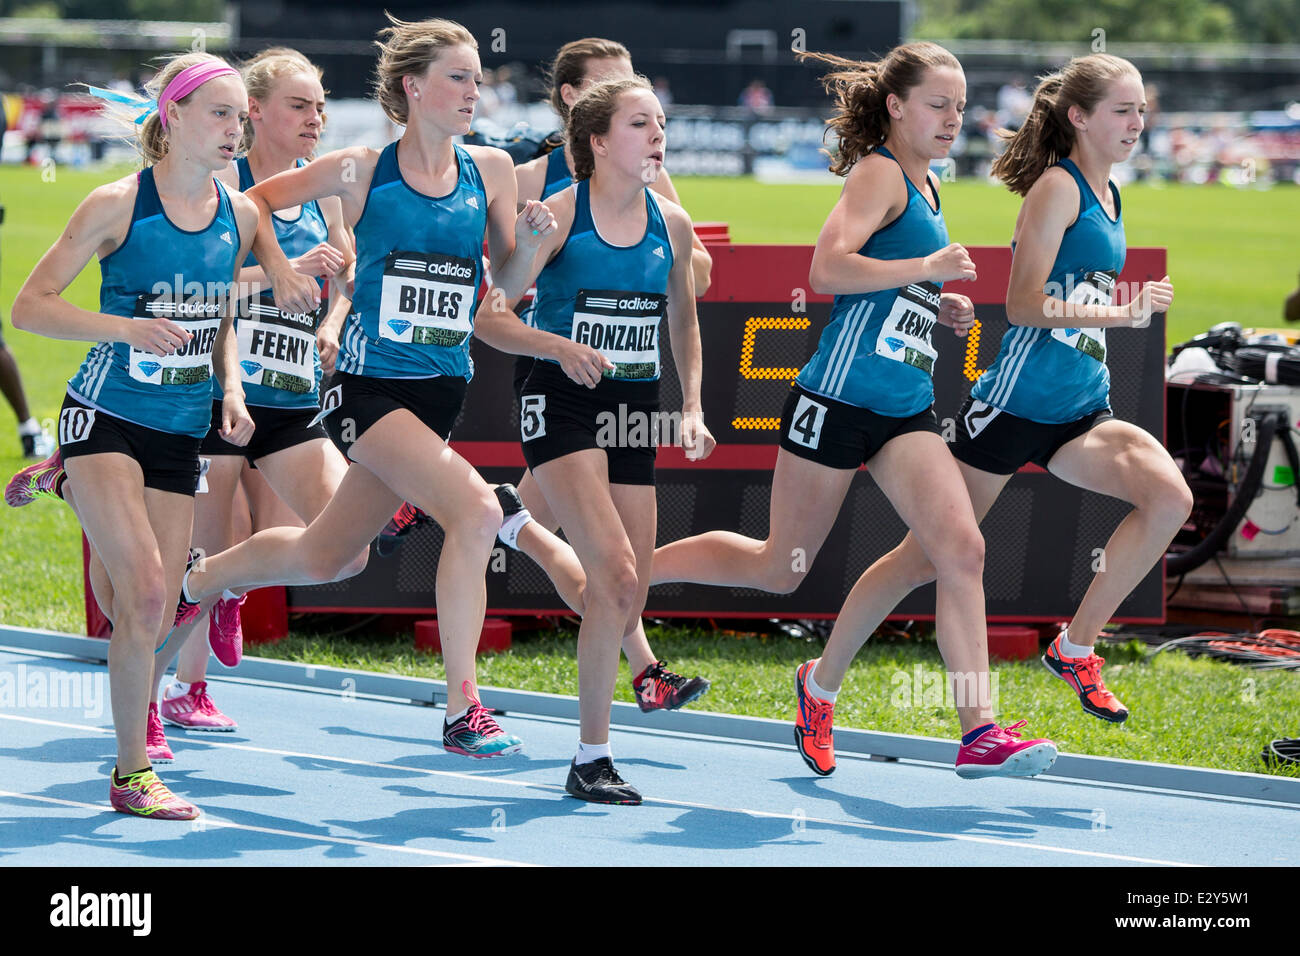 Adidas Girls' Dream Mile at the 2014 Adidas Track and Field Grand Prix  Stock Photo - Alamy